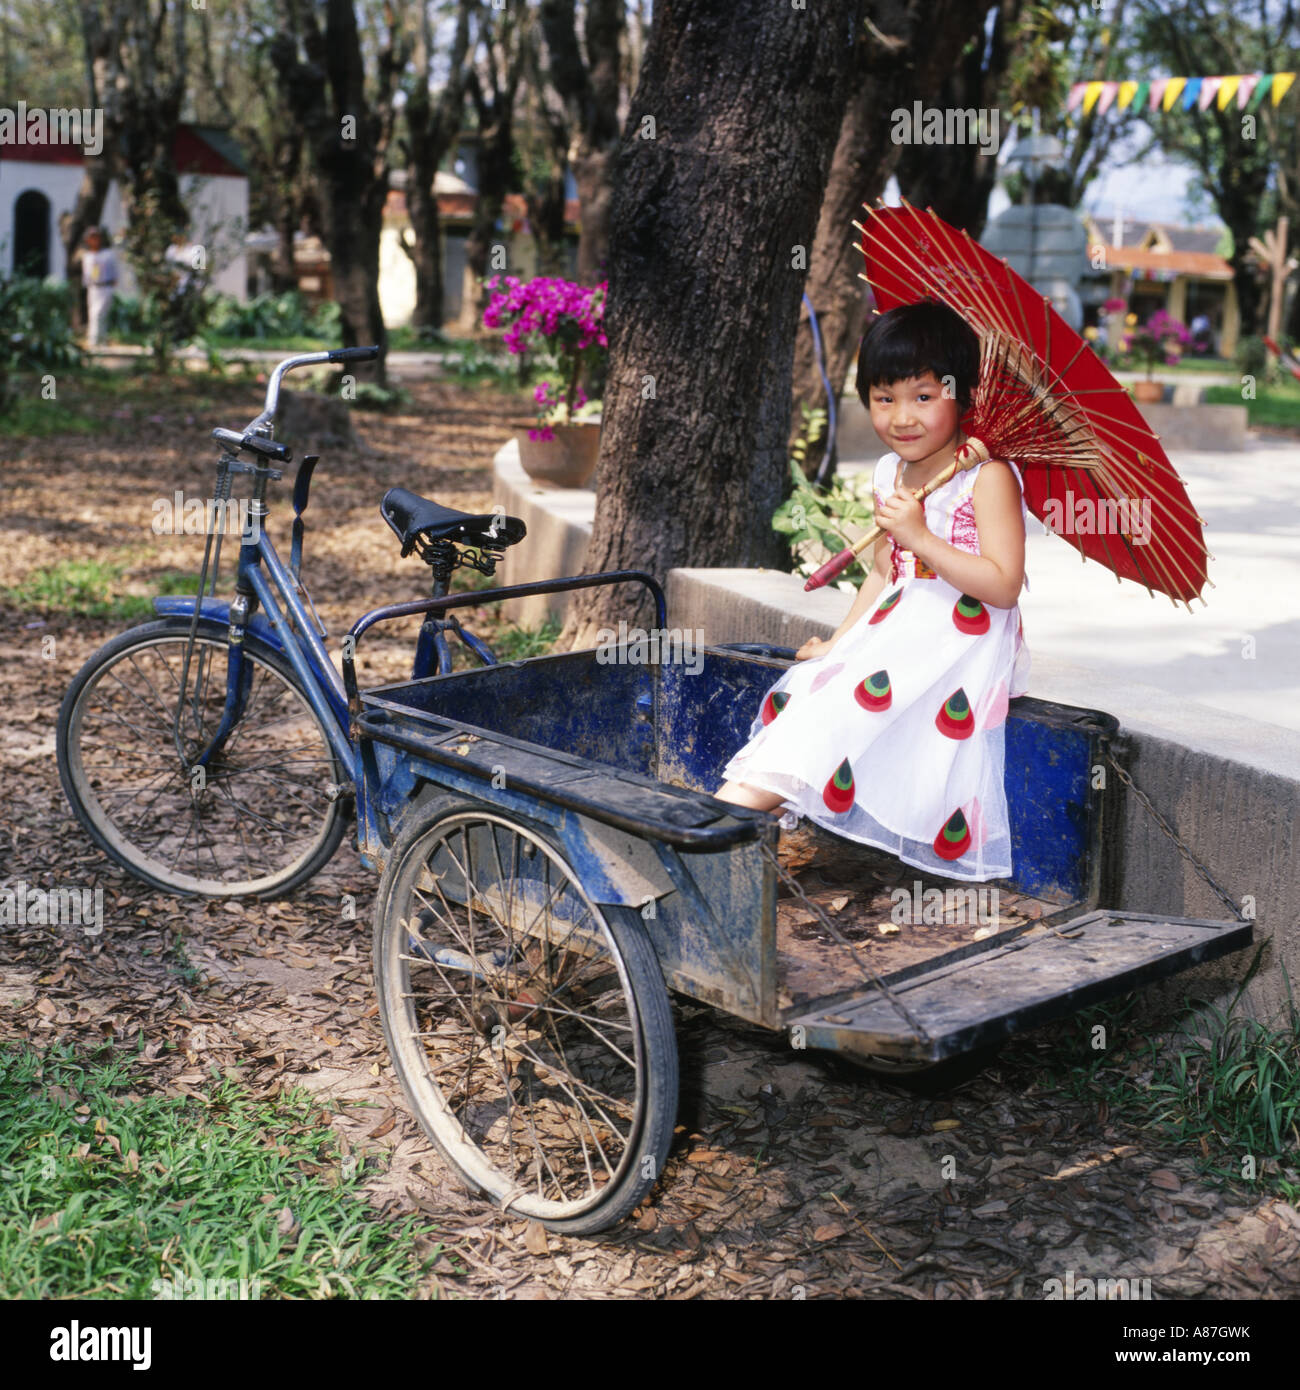 Young local girl,holding red parasol,sitting in the back of tricycle trailer,Jinghong,Yunnan province,China Stock Photo